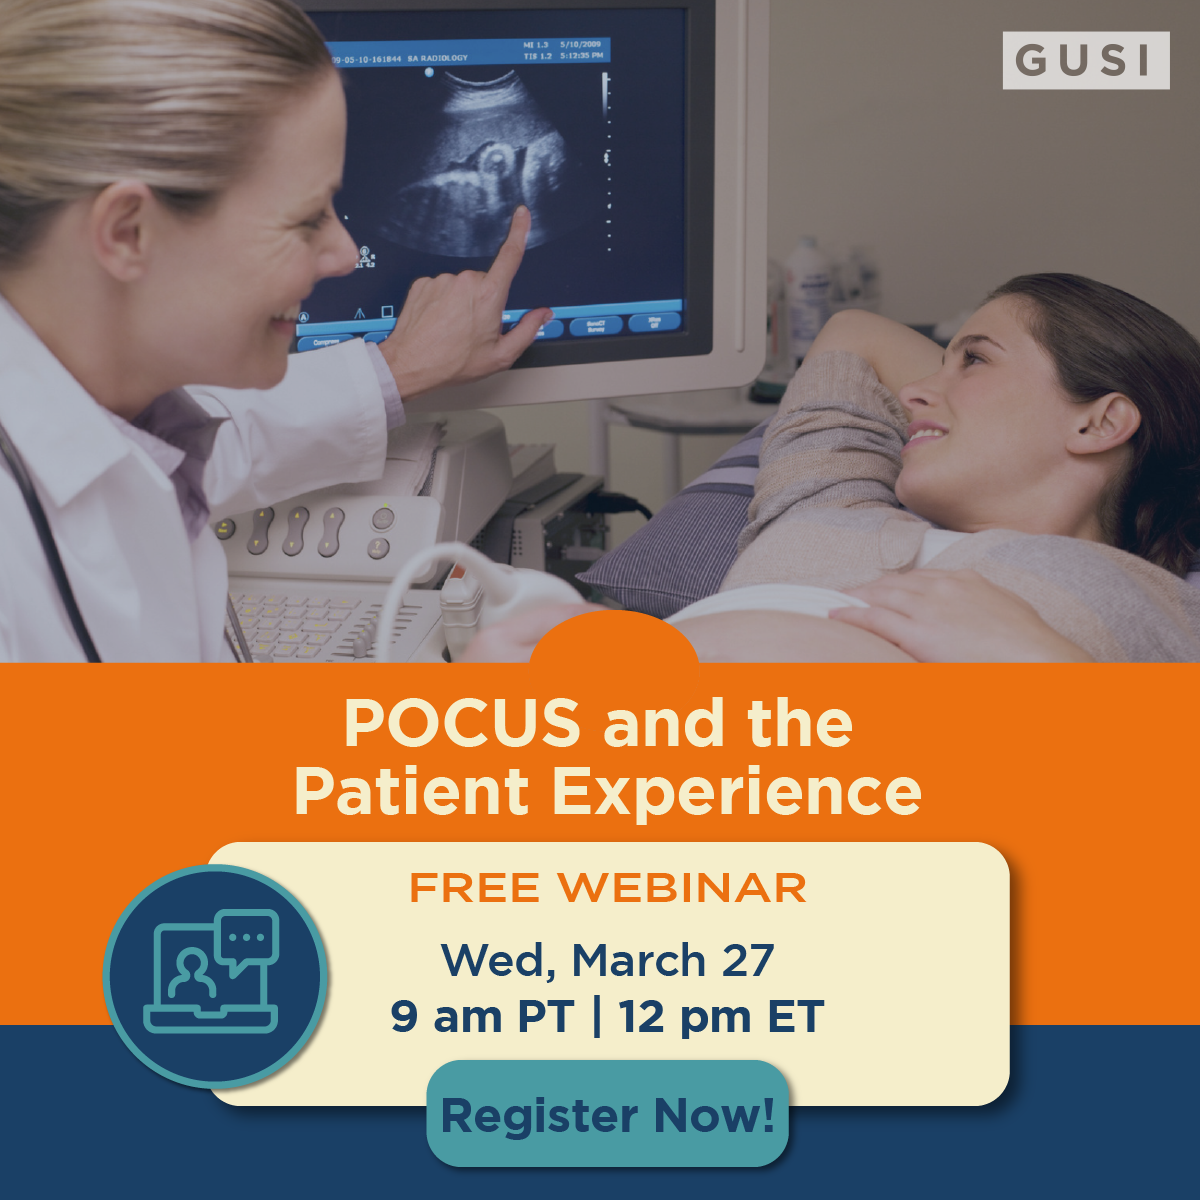 FREE webinar on POCUS and Patient Experience